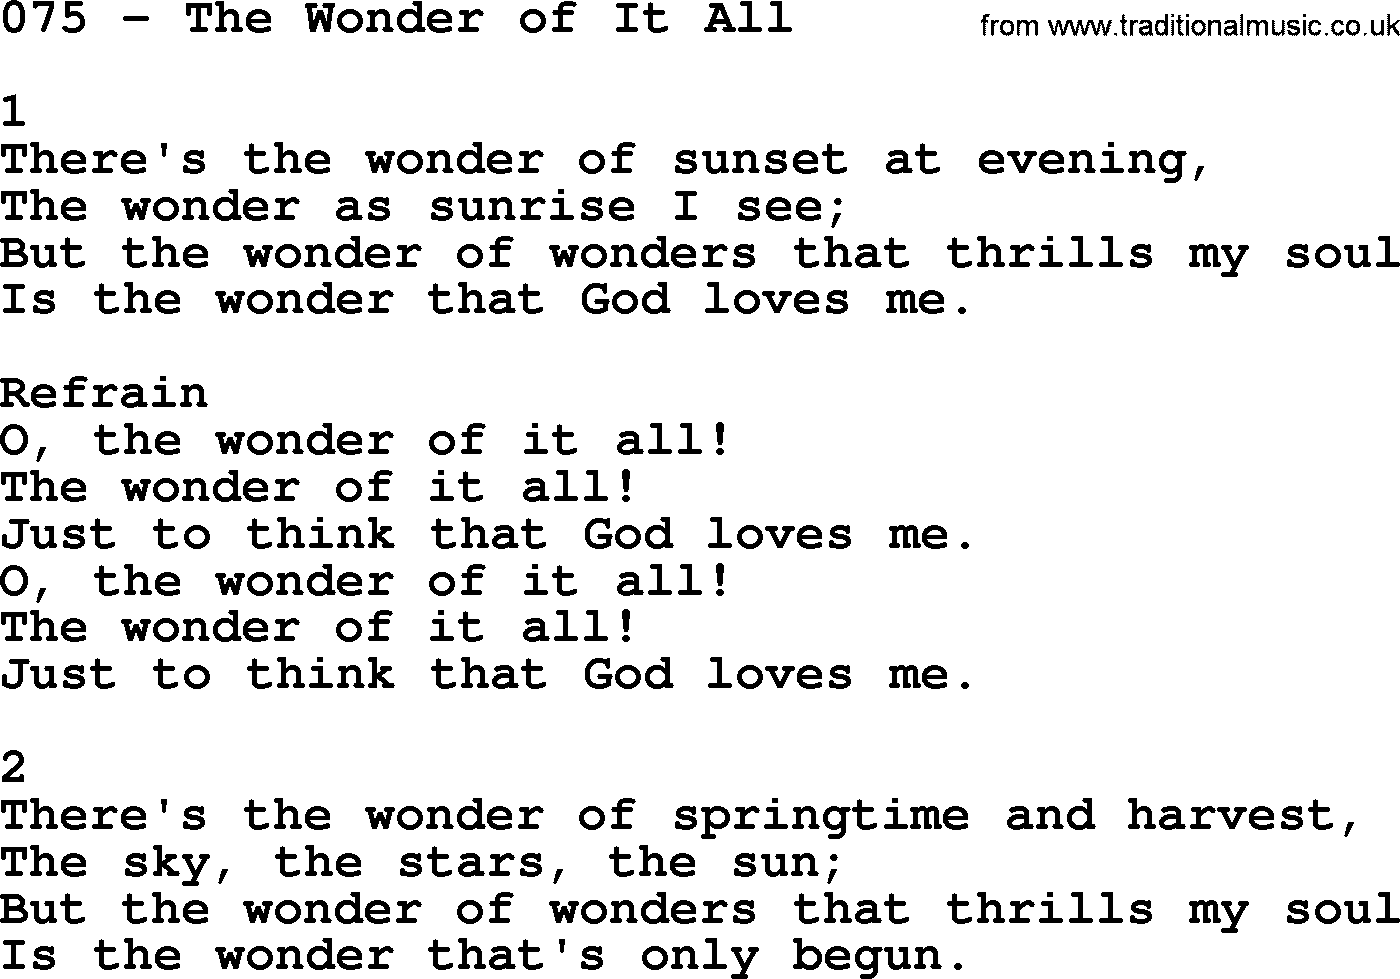 Complete Adventis Hymnal, title: 075-The Wonder Of It All, with lyrics, midi, mp3, powerpoints(PPT) and PDF,